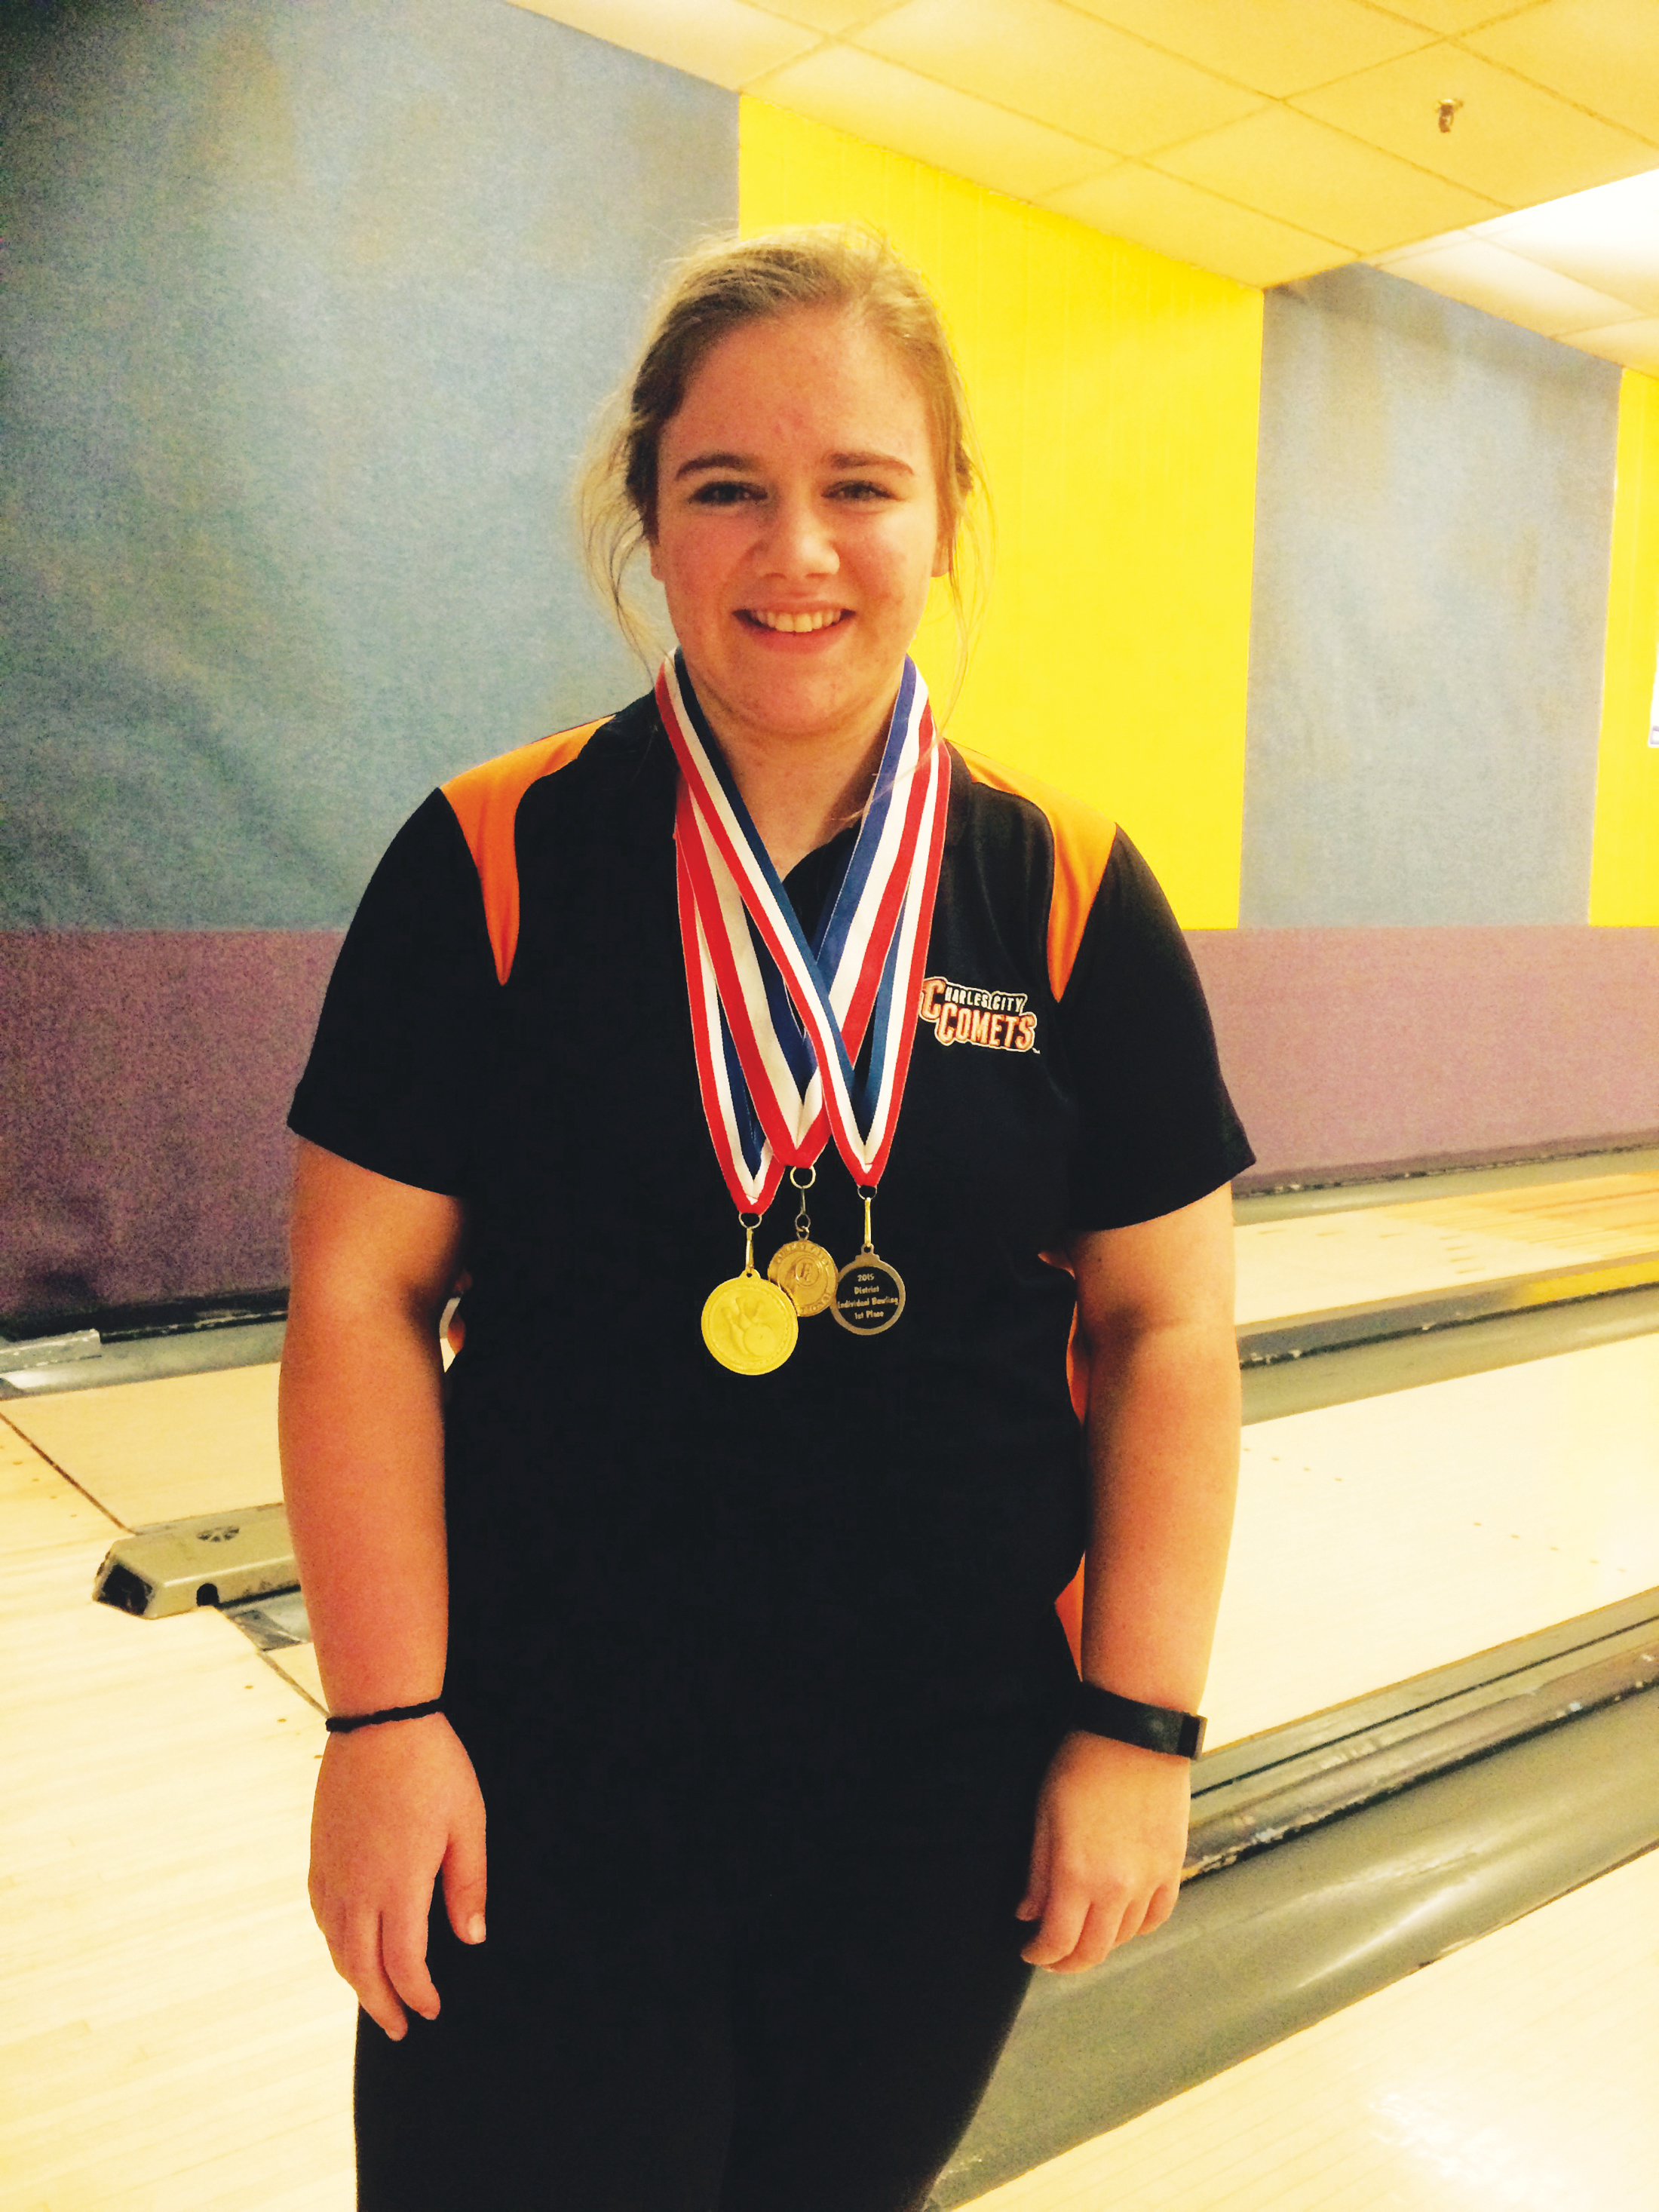 Comet Macy Ross wins third district title; Charles City to host Sub-State bowling meet